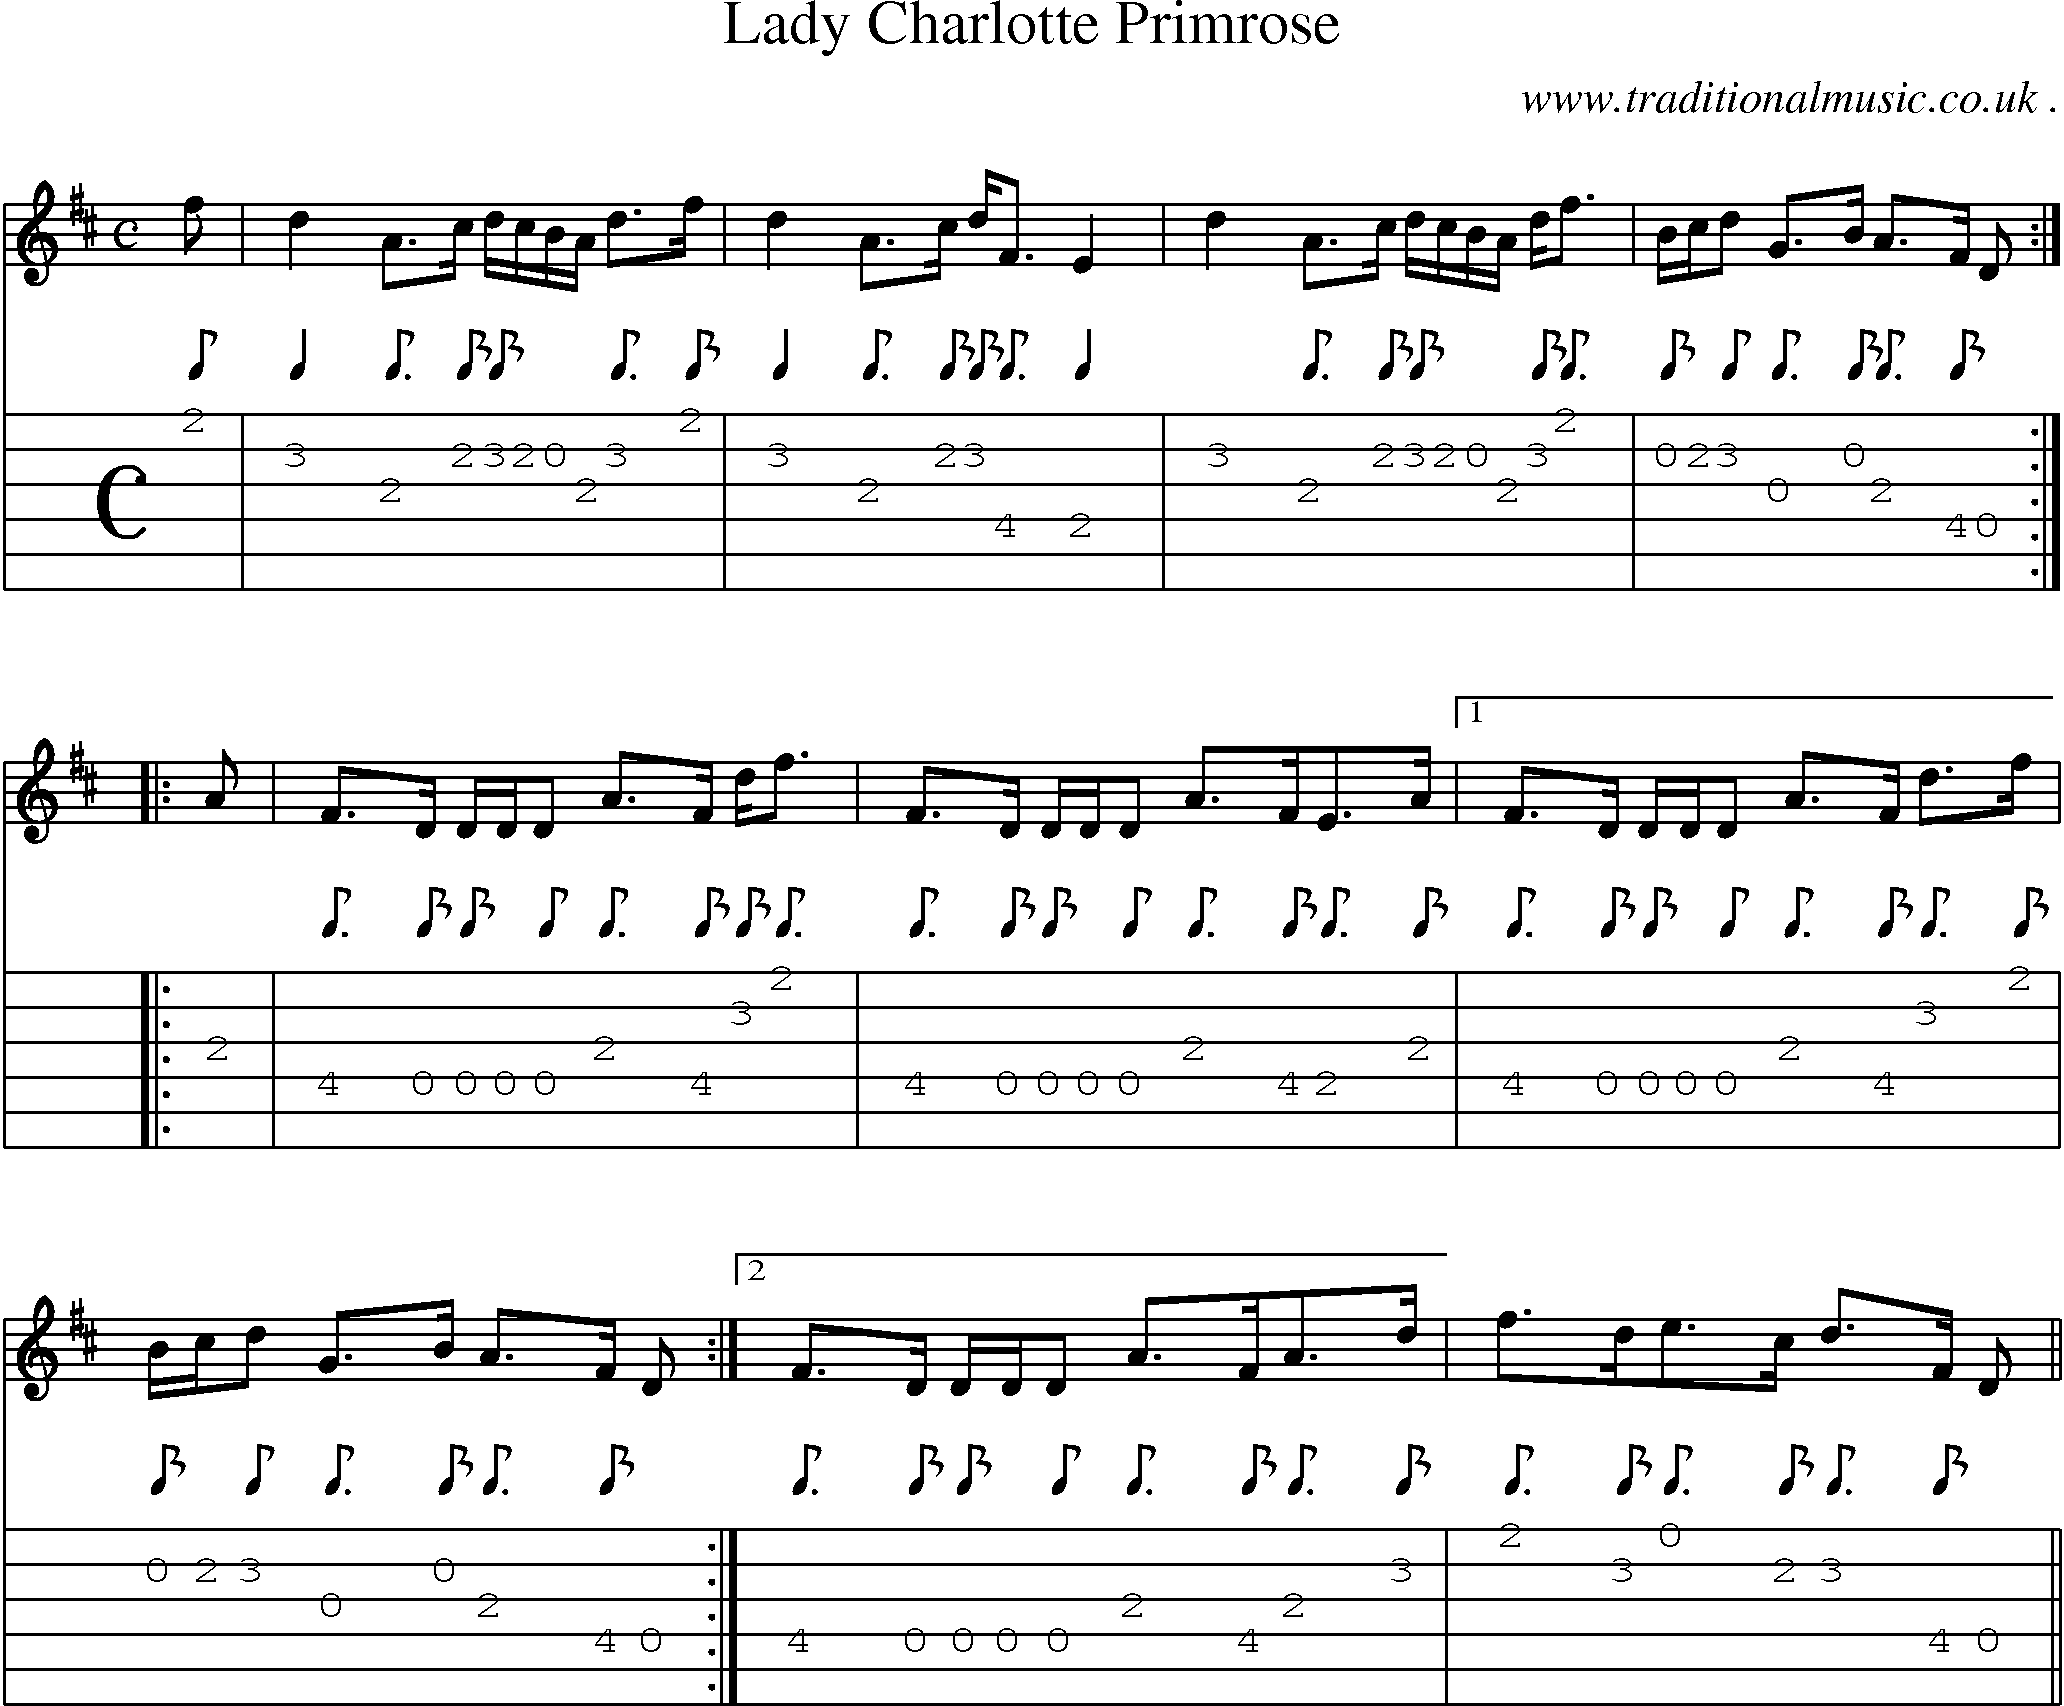 Sheet-music  score, Chords and Guitar Tabs for Lady Charlotte Primrose